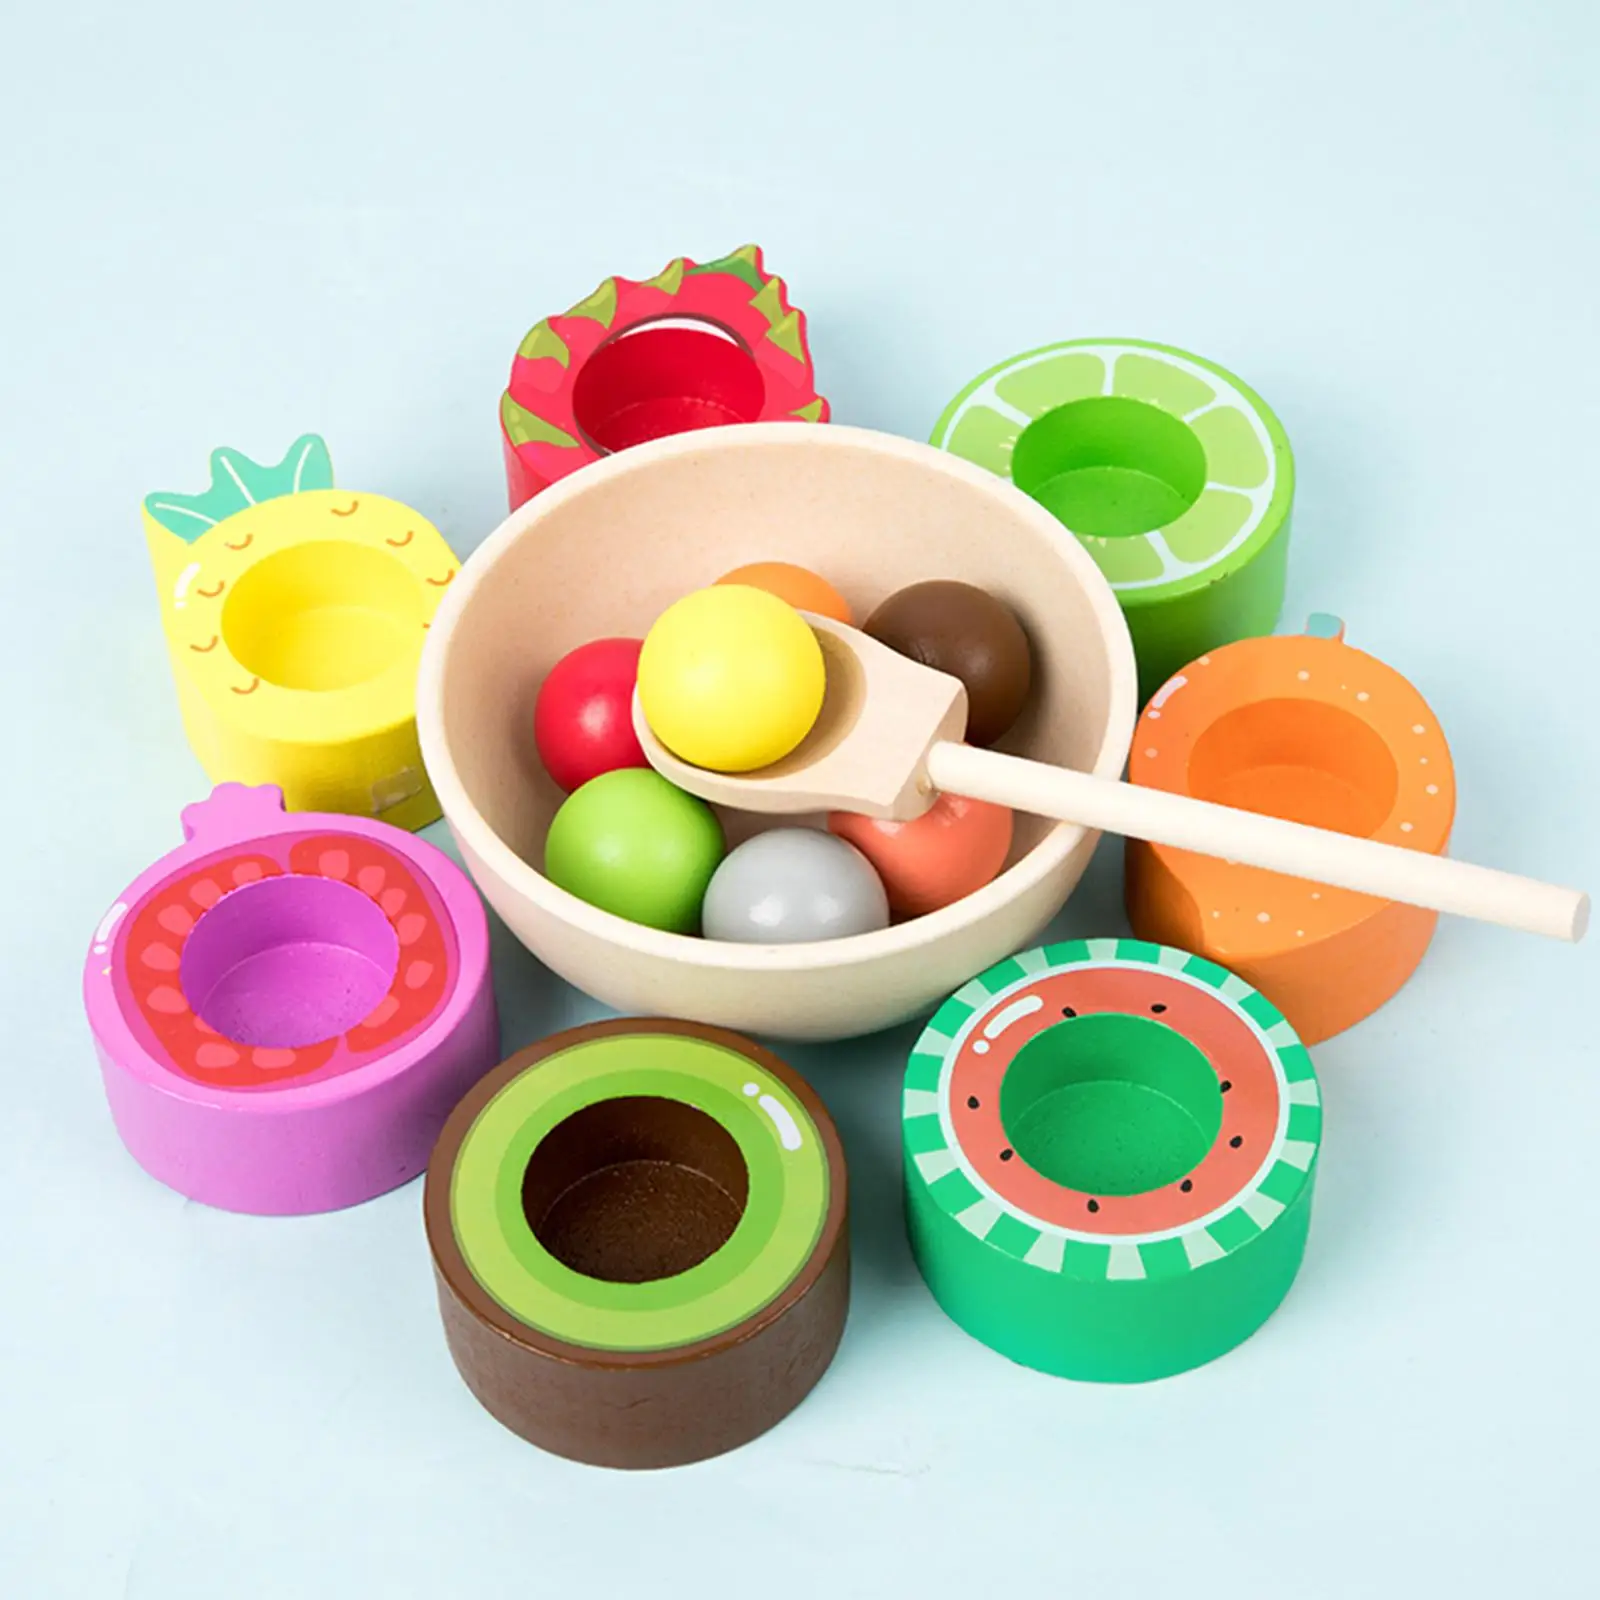 Wooden Ball in Cups Fine Motor Preschool Sensory Toys Board Game Color Sorting Educational Toys for Girls Age 3 4 5 6 